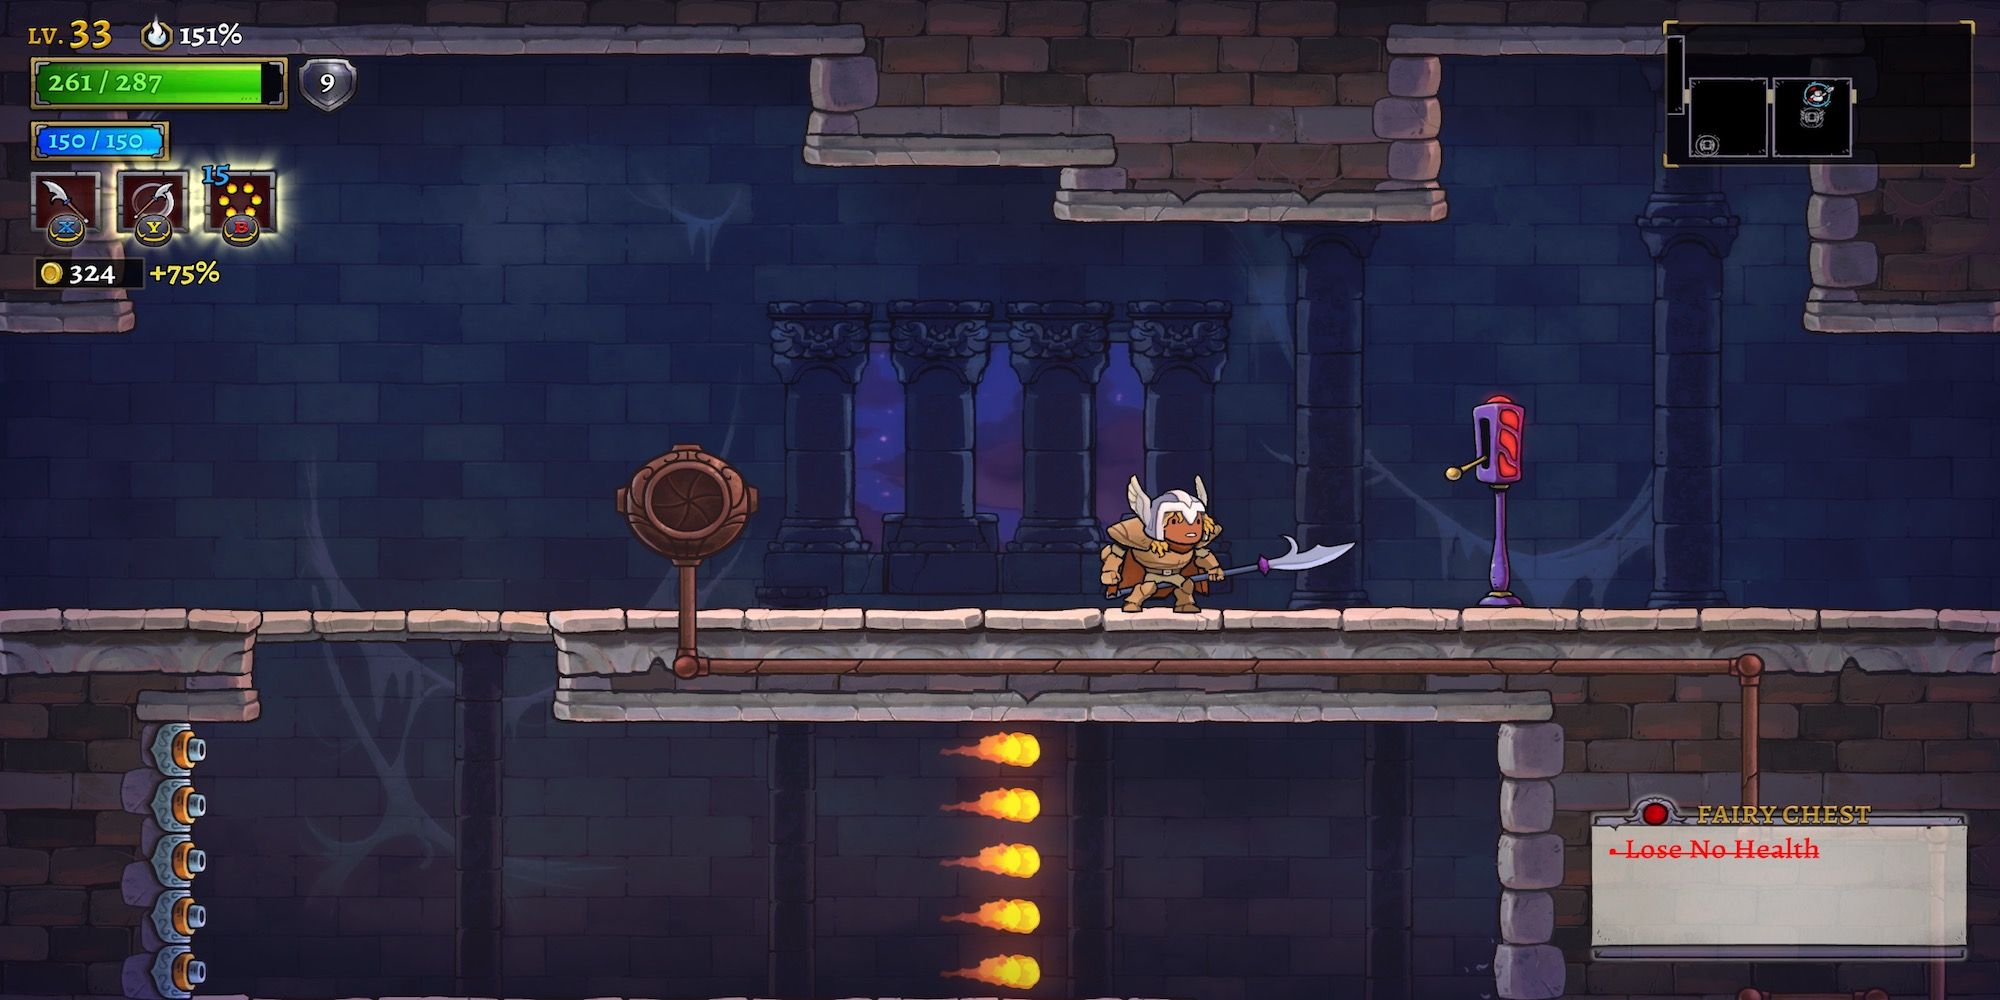 A challenge room in Rogue Legacy 2